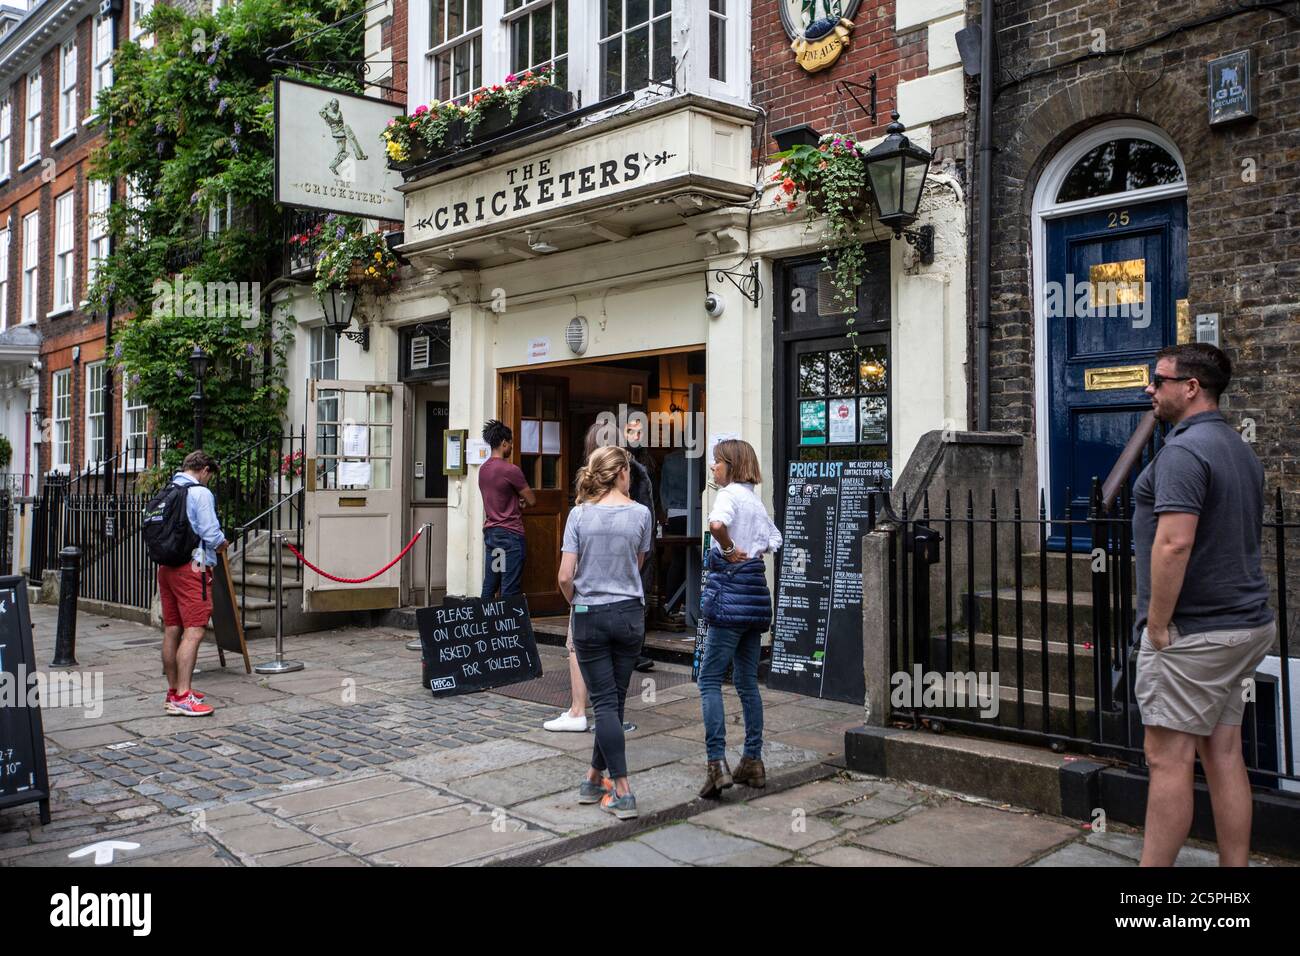 Queues outside 'The Cricketers' public house during the gradual reopening after coronavirus COVID-19 lockdown, The Green, Richmond, Southwest London Stock Photo